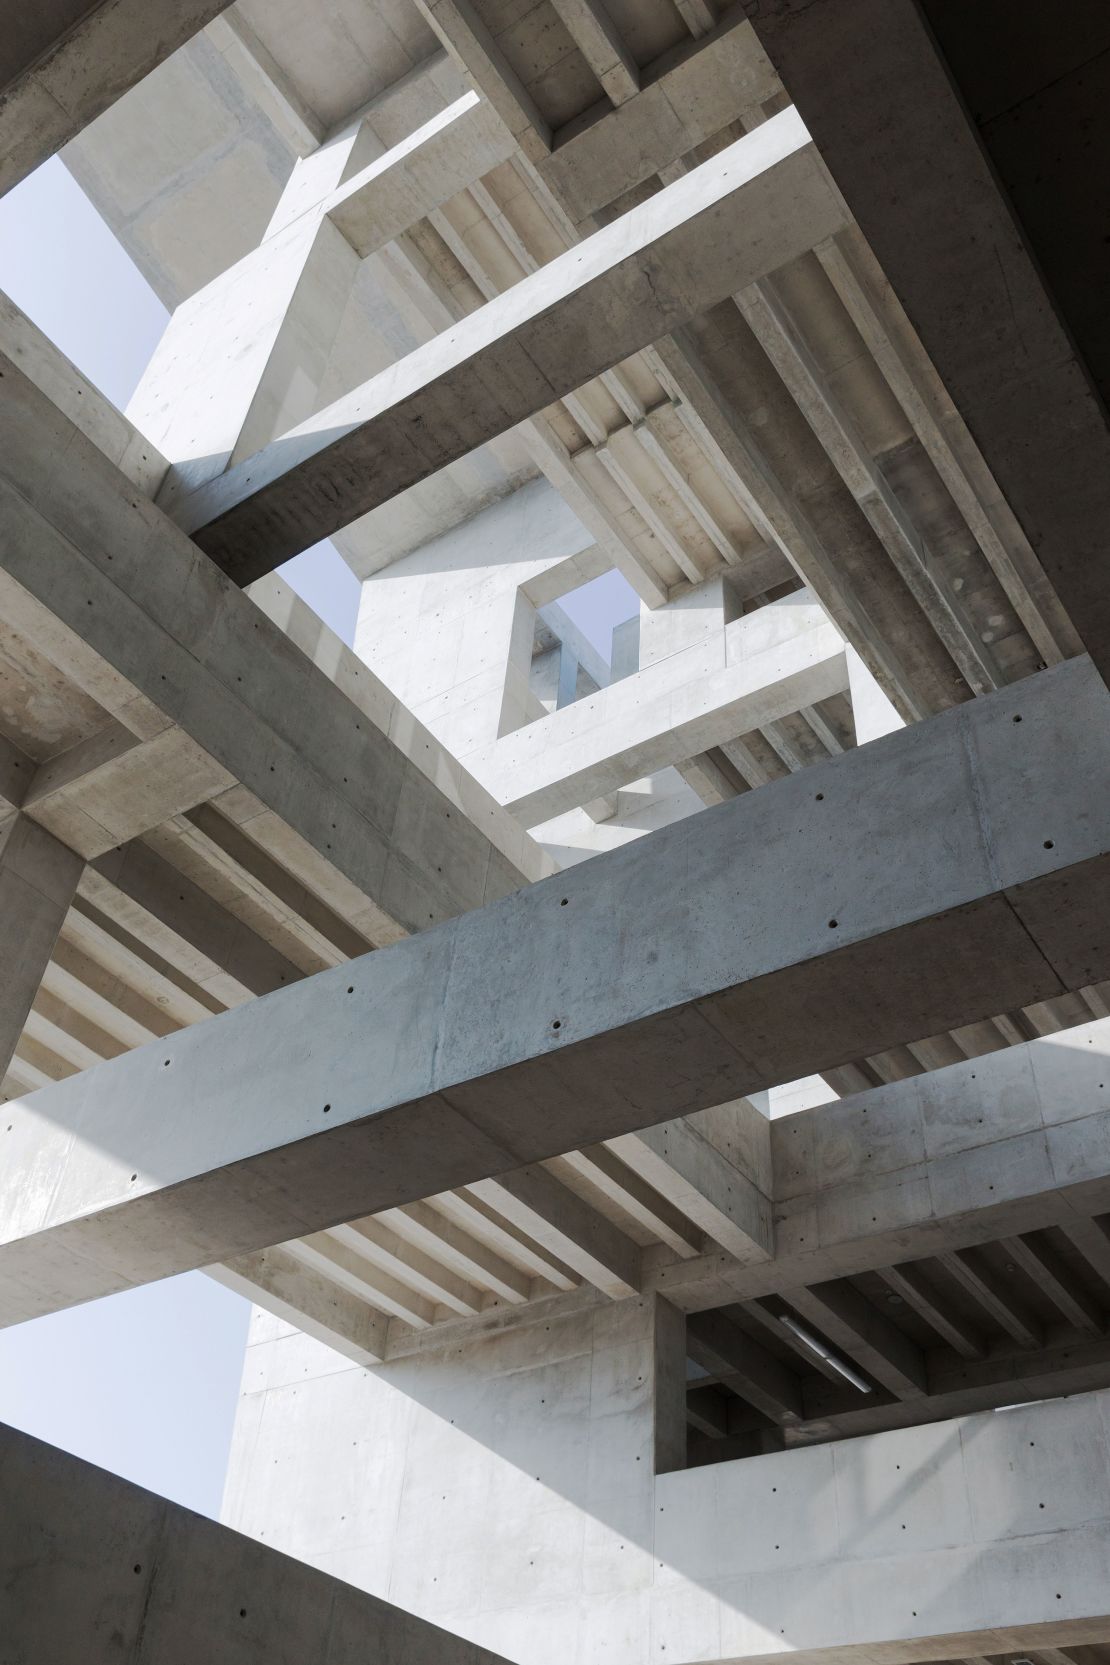 Grafton Architects is known for its use of sturdy materials like concrete and stone.